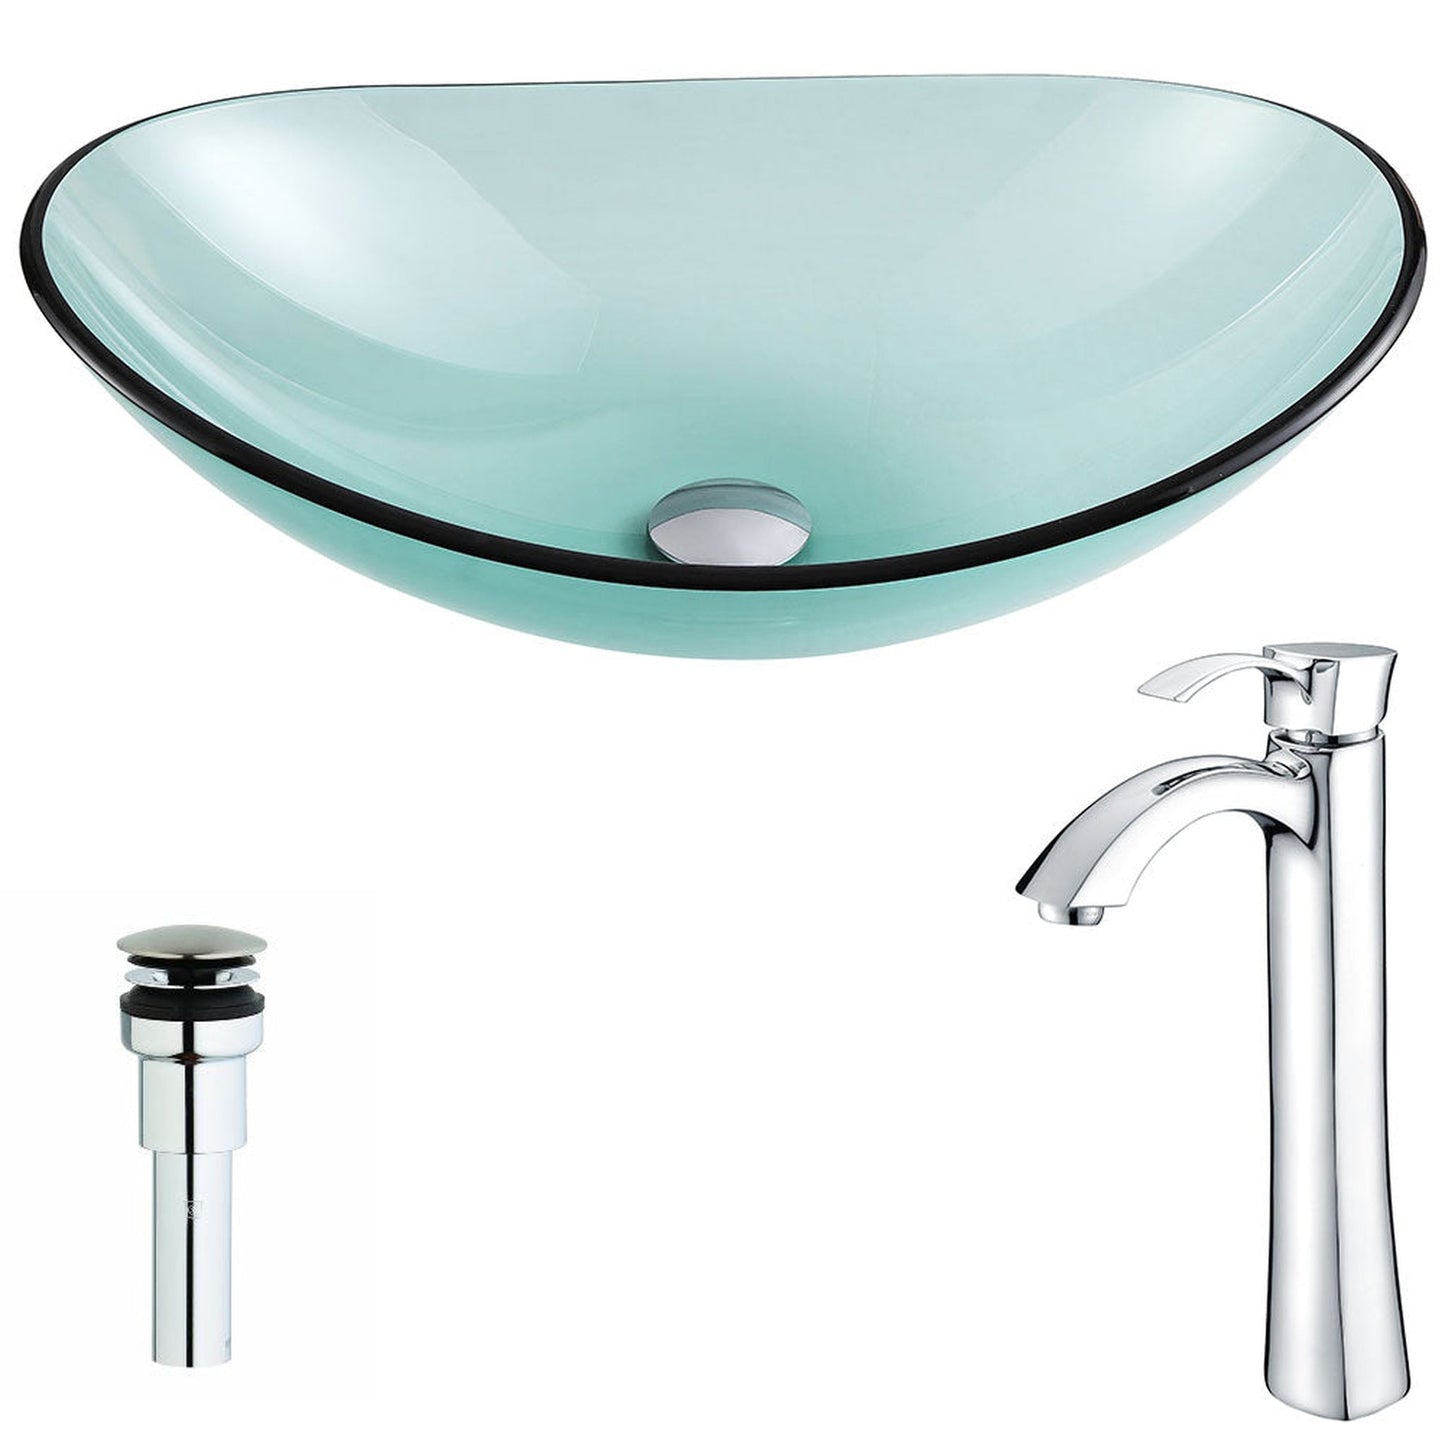 ANZZI Major Series 21" x 14" Oval Shaped Lustrous Green Deco-Glass Vessel Sink With Chrome Pop-Up Drain and Harmony Faucet